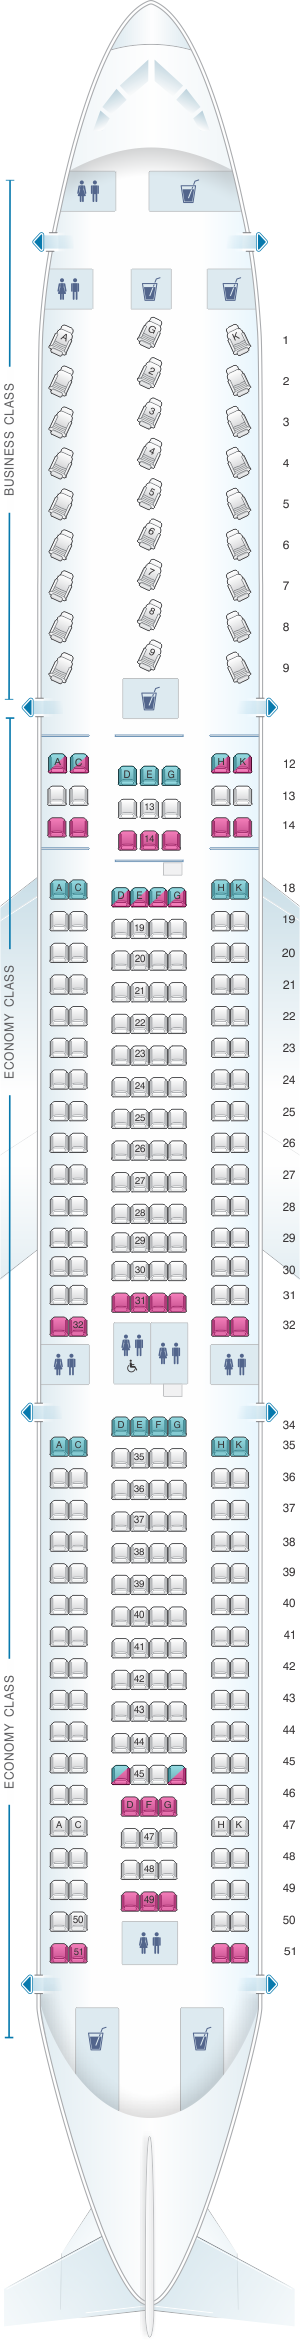 Seat map for Air Canada Airbus A330 300 North America